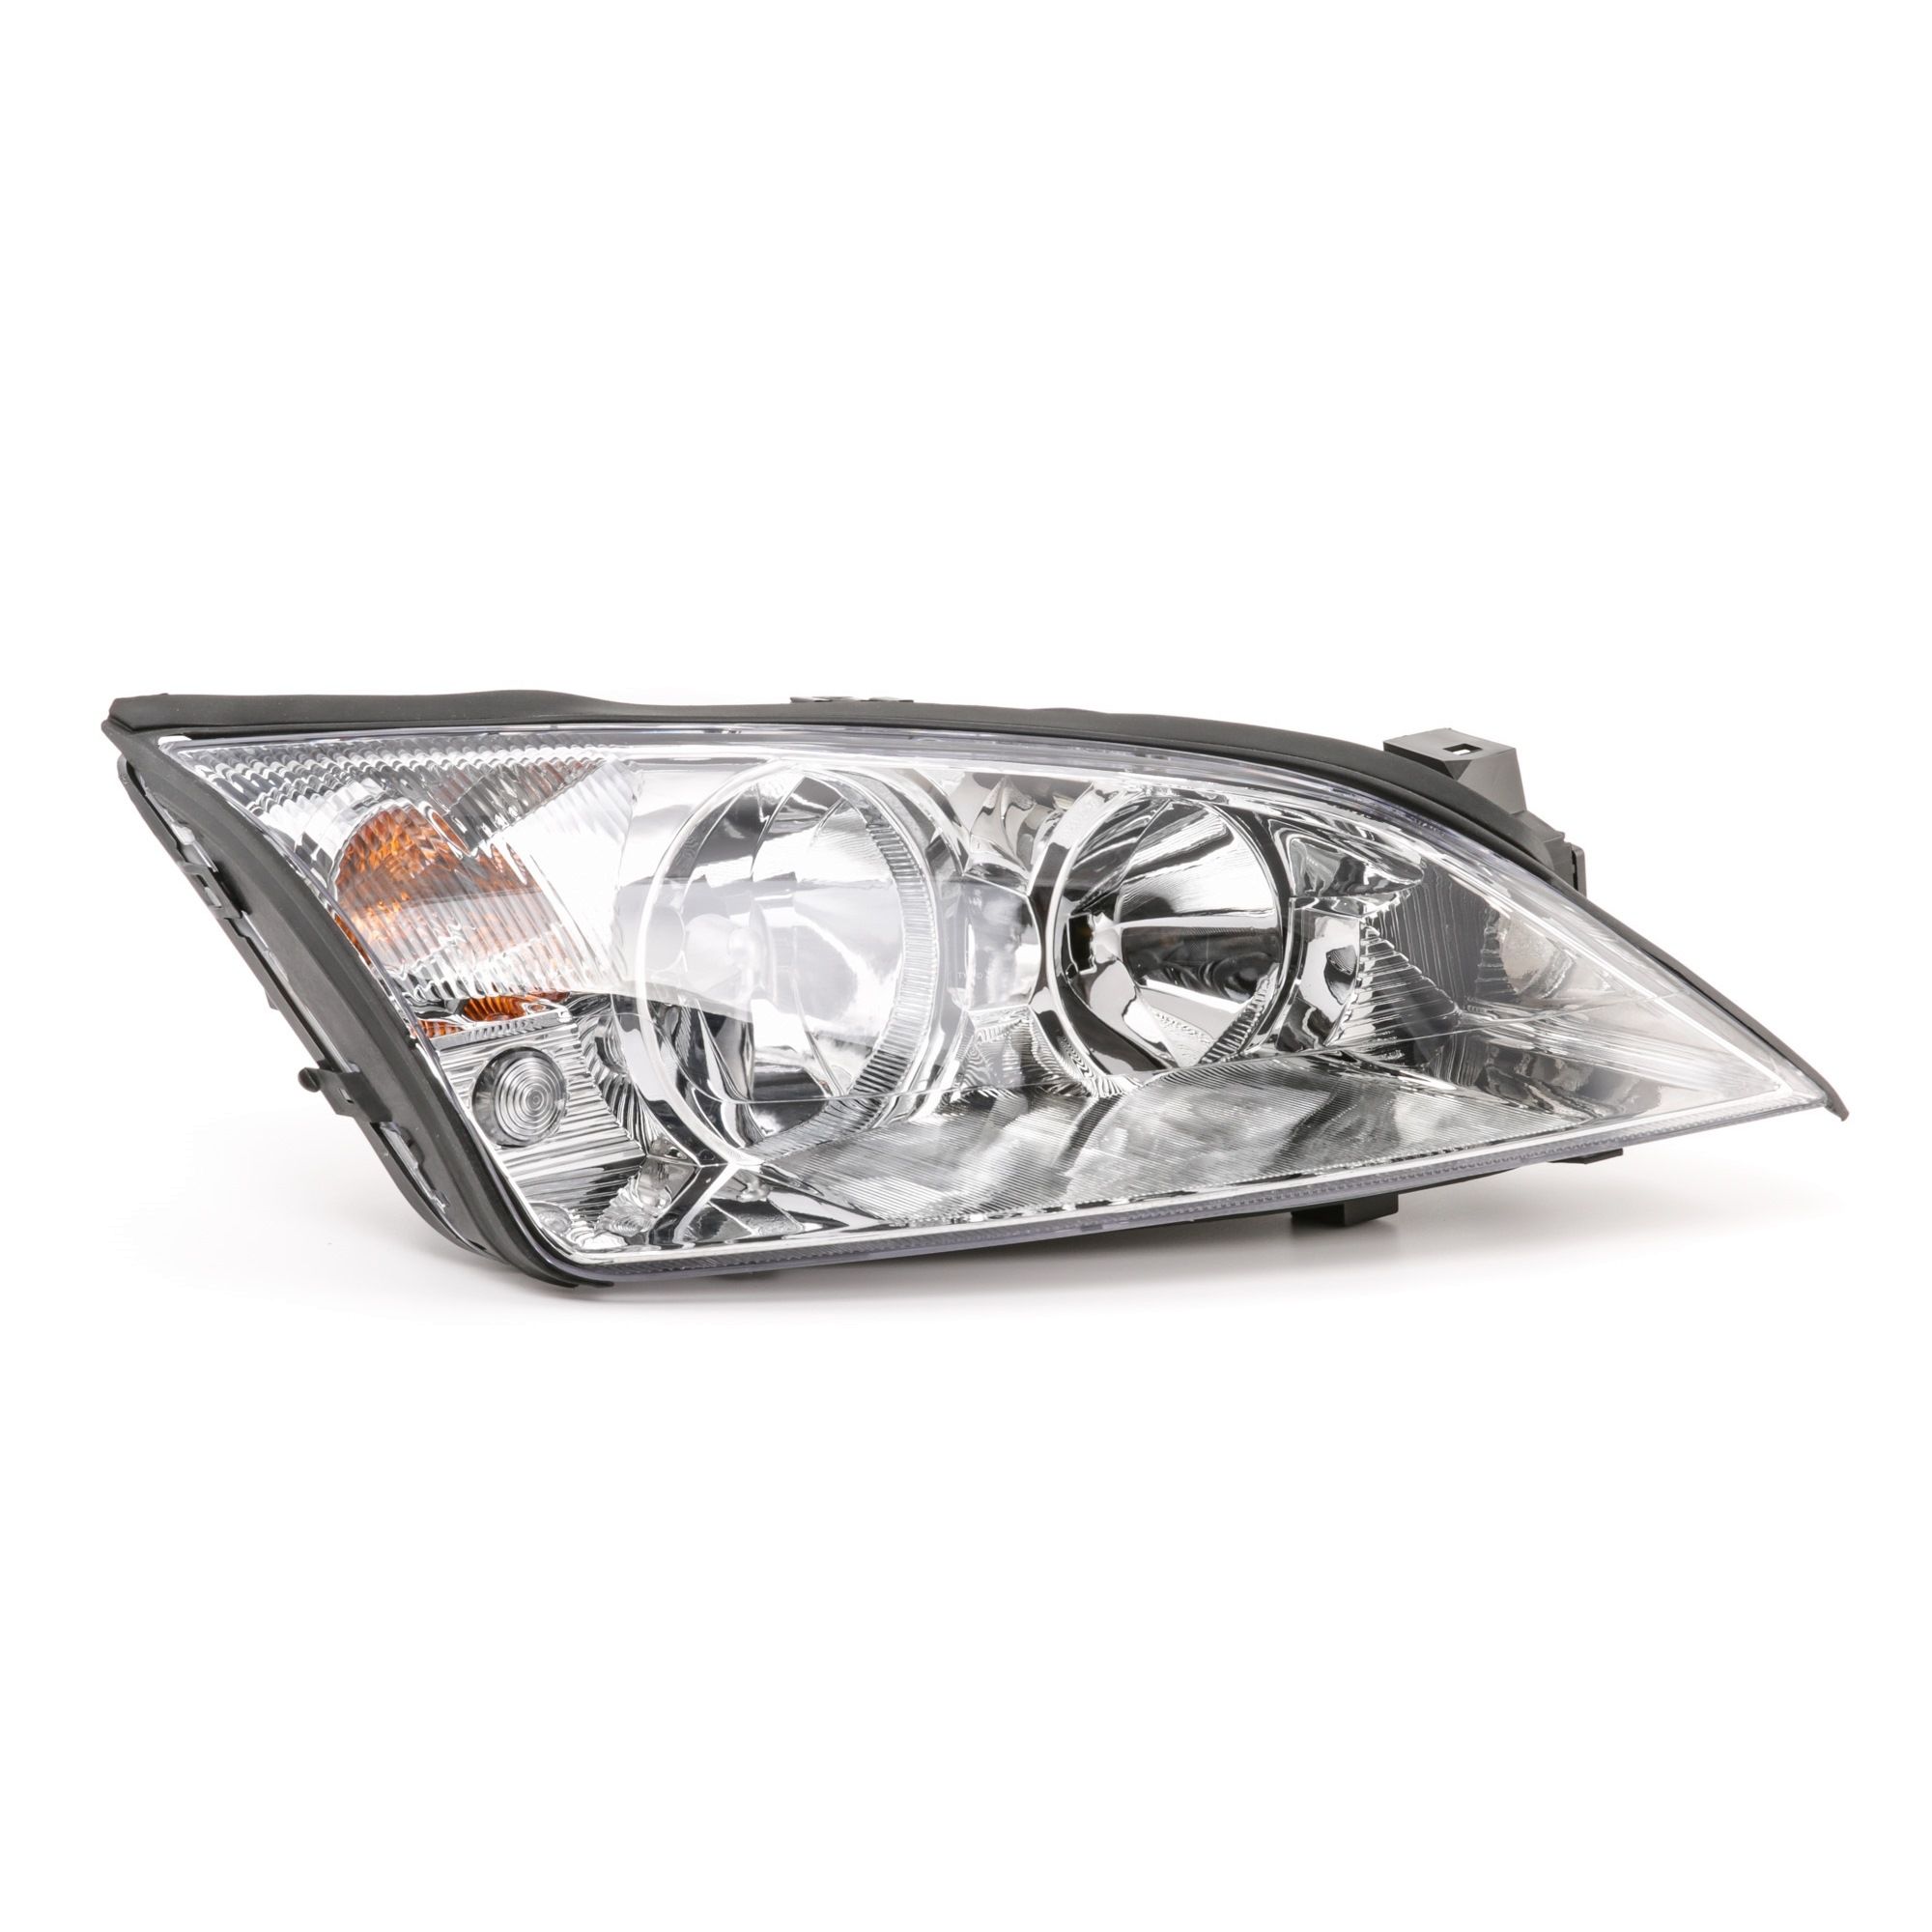 Ford MONDEO Headlights 1502829 TYC 20-6245-05-2 online buy